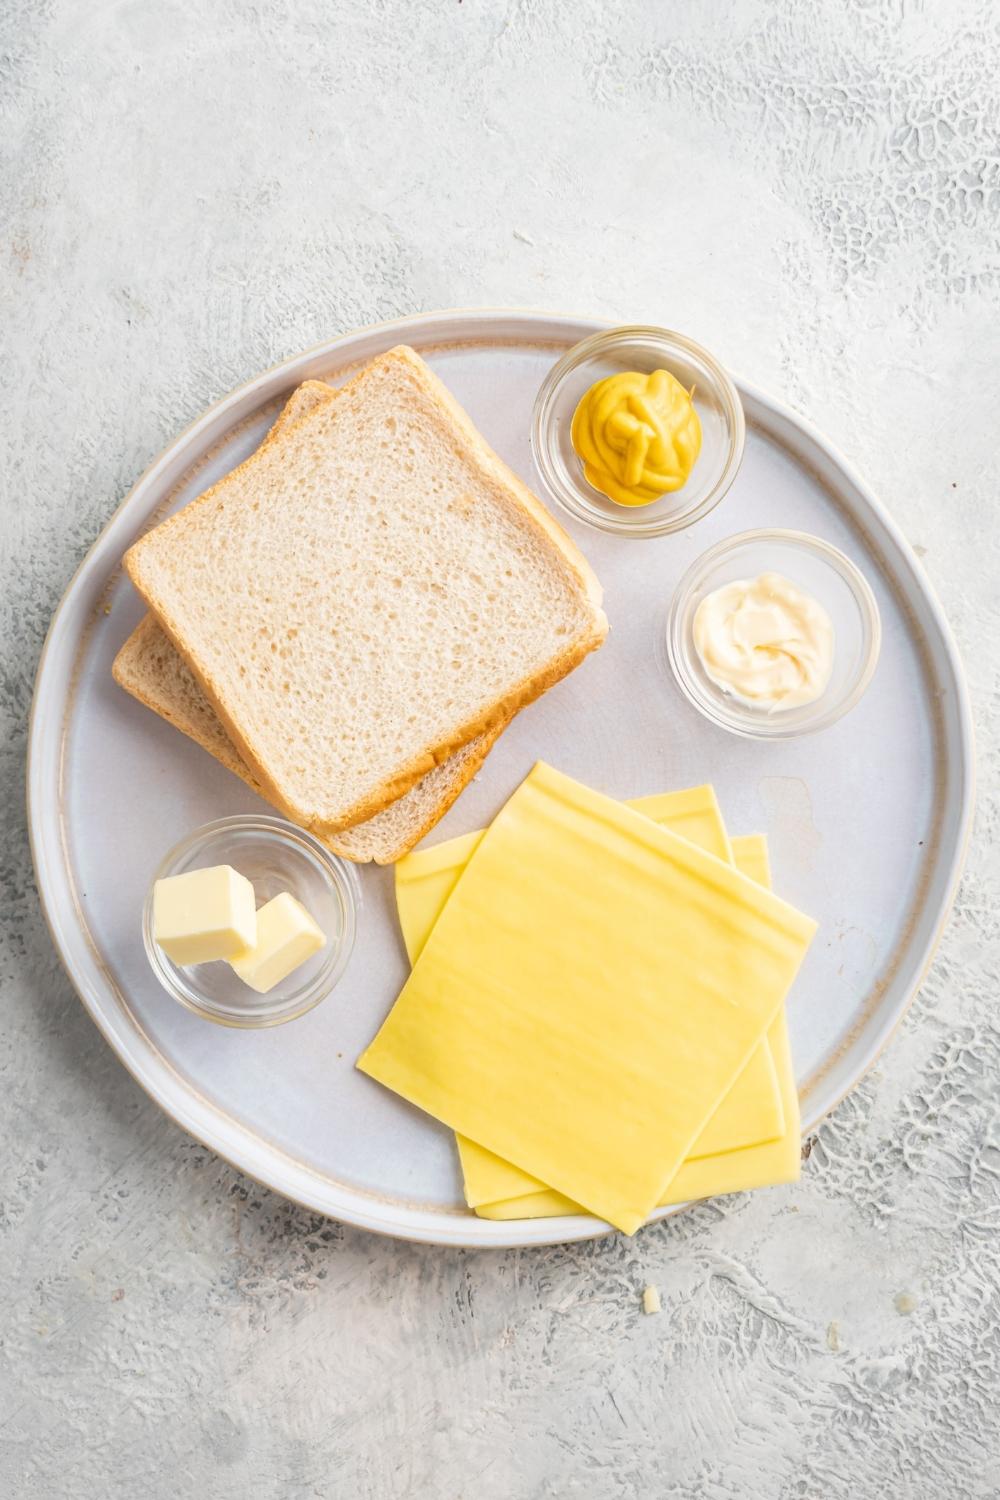 An overhead view of two slices of white bread, three slices of cheese, and three small bowls containing mustard, mayo, and butter.